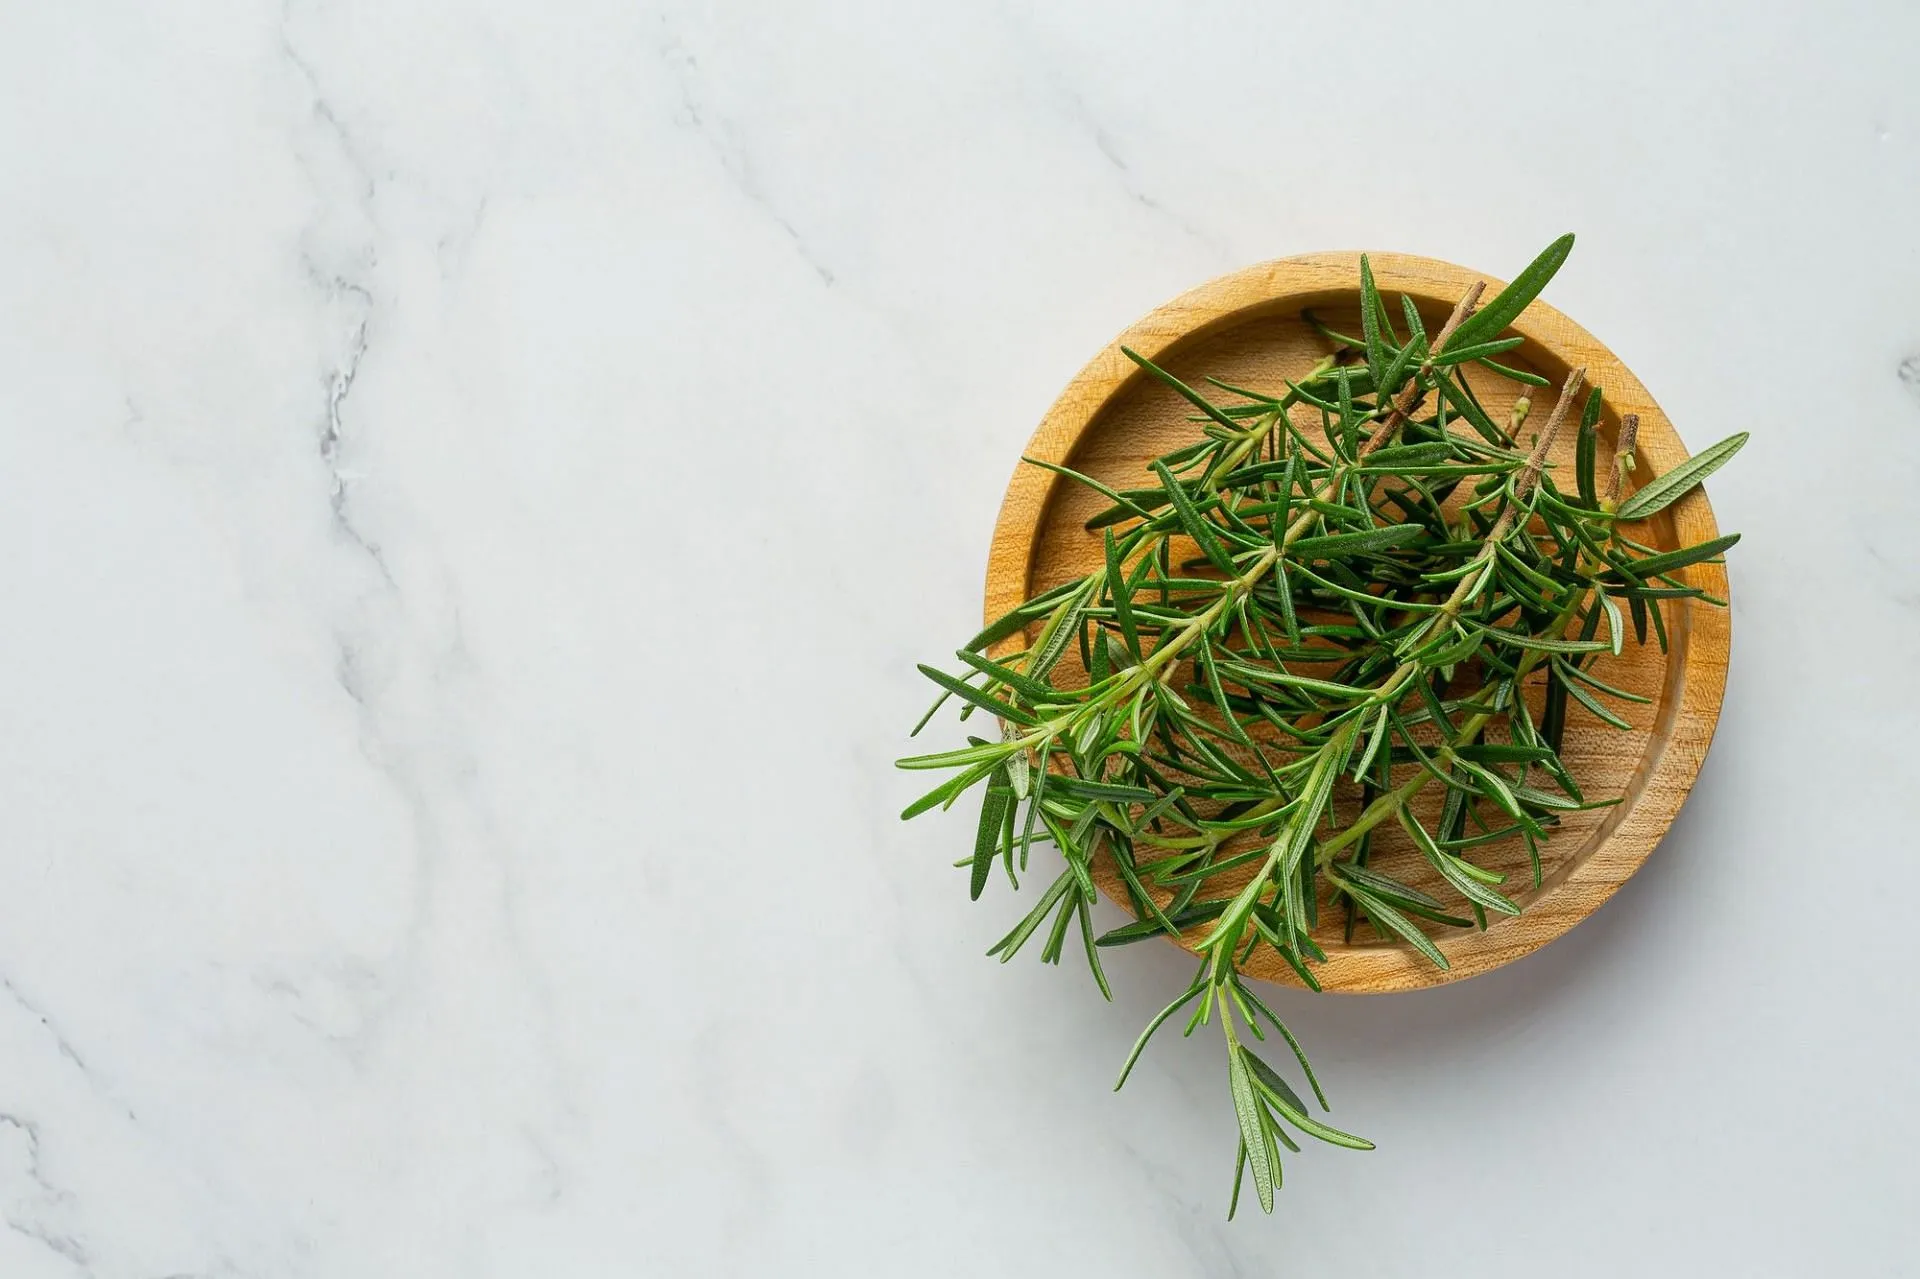 There are several other uses of rosemary. (Image via Freepik/jcomp)